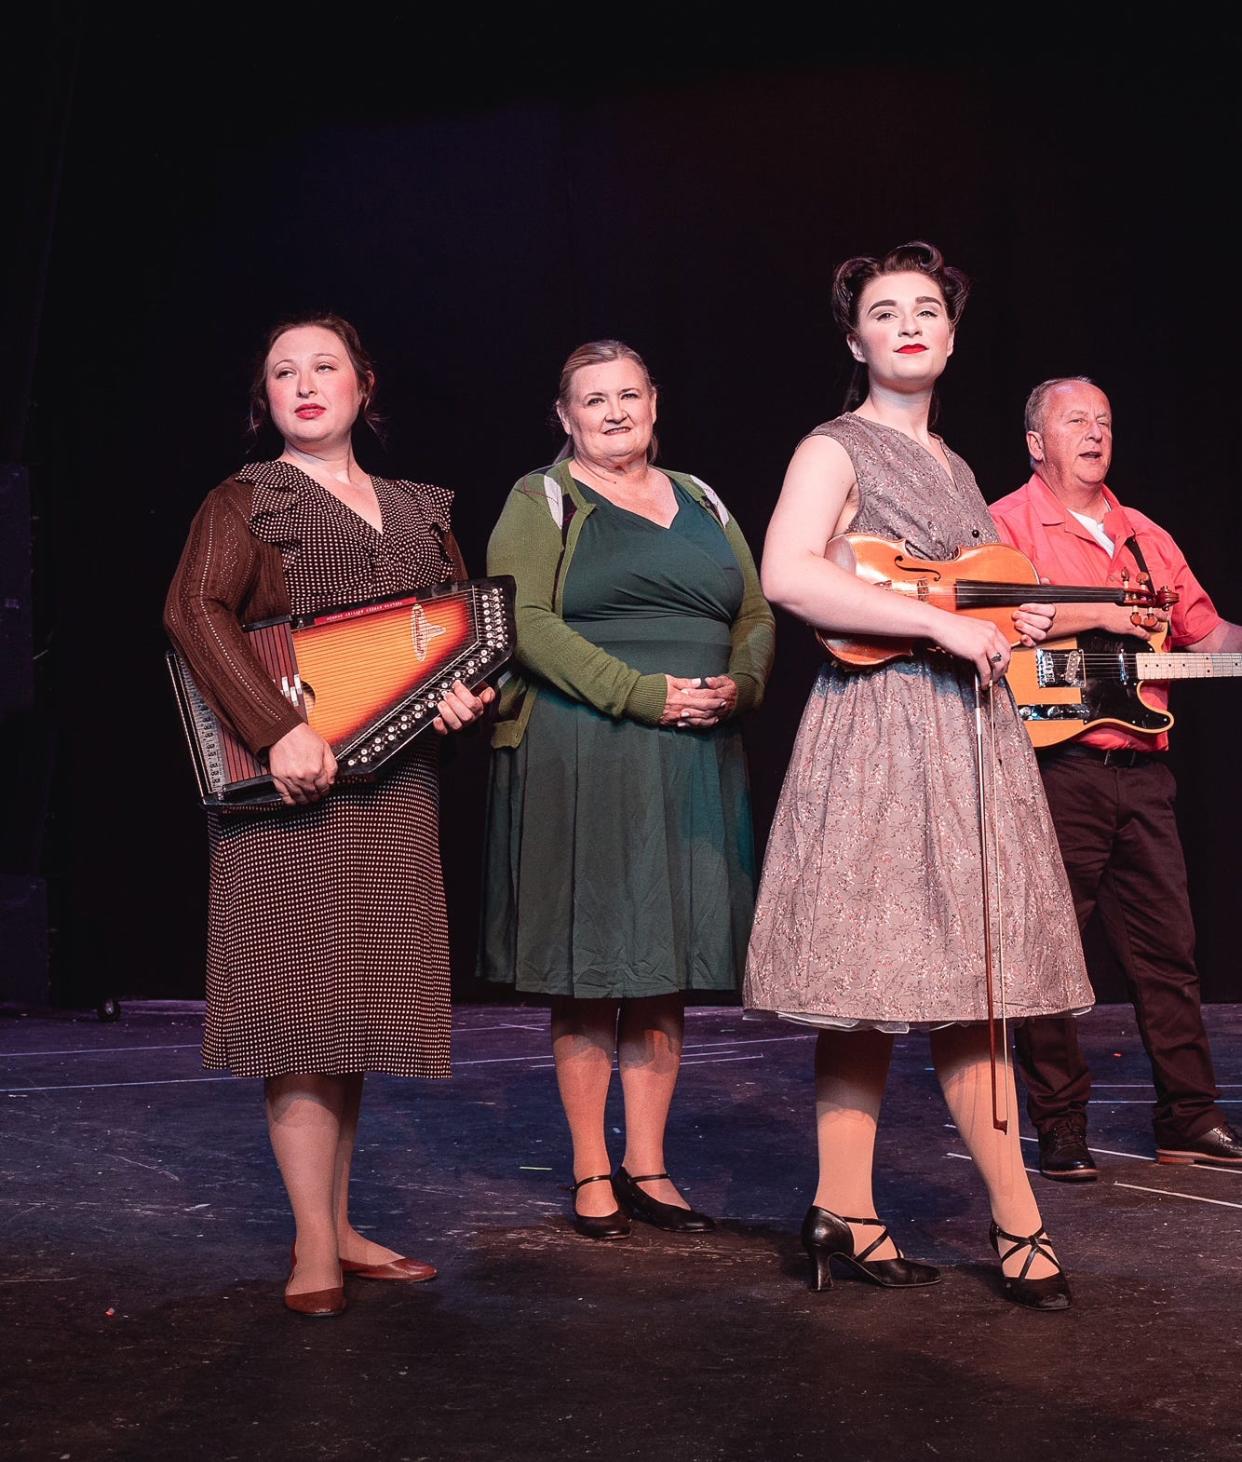 Haley Rodgers, Susan Silvey, Hannah Culpepper and Billy Jenkins were among those appearing in Theatre of Gadsden's 2022 production of "Ring of Fire: The Music of Johnny Cash," The show and its participants claimed several honors in the 2022 BroadwayWorld Birmingham Awards.